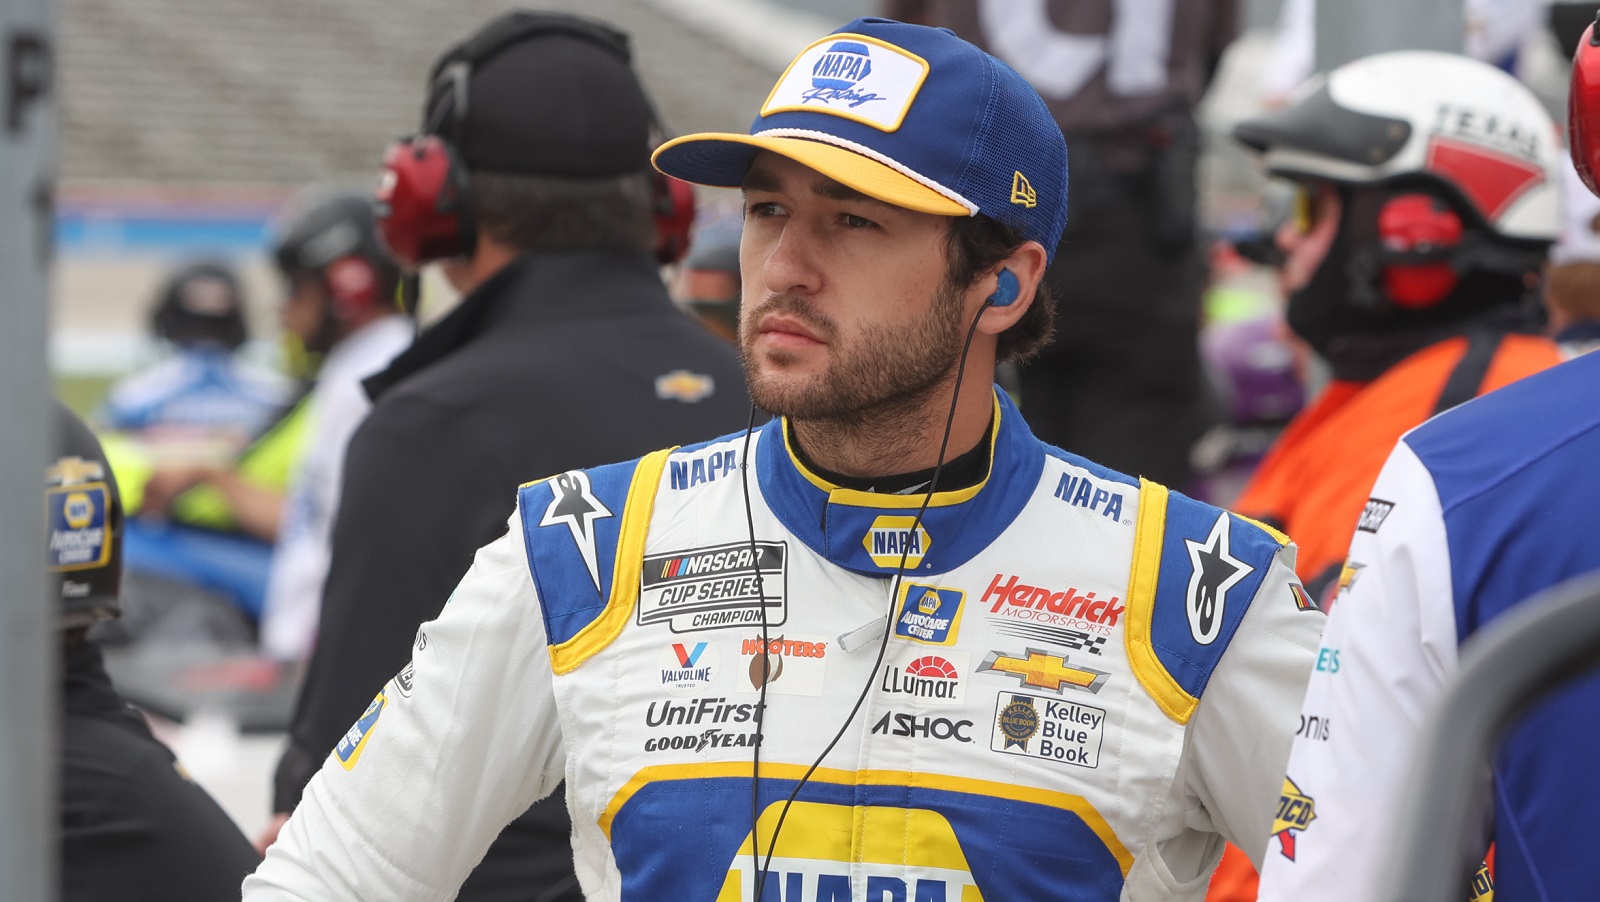 Chase Elliott watches the action during practice for the NASCAR Cup Series All-Star Race on May 21, 2022, at Texas Motor Speedway.